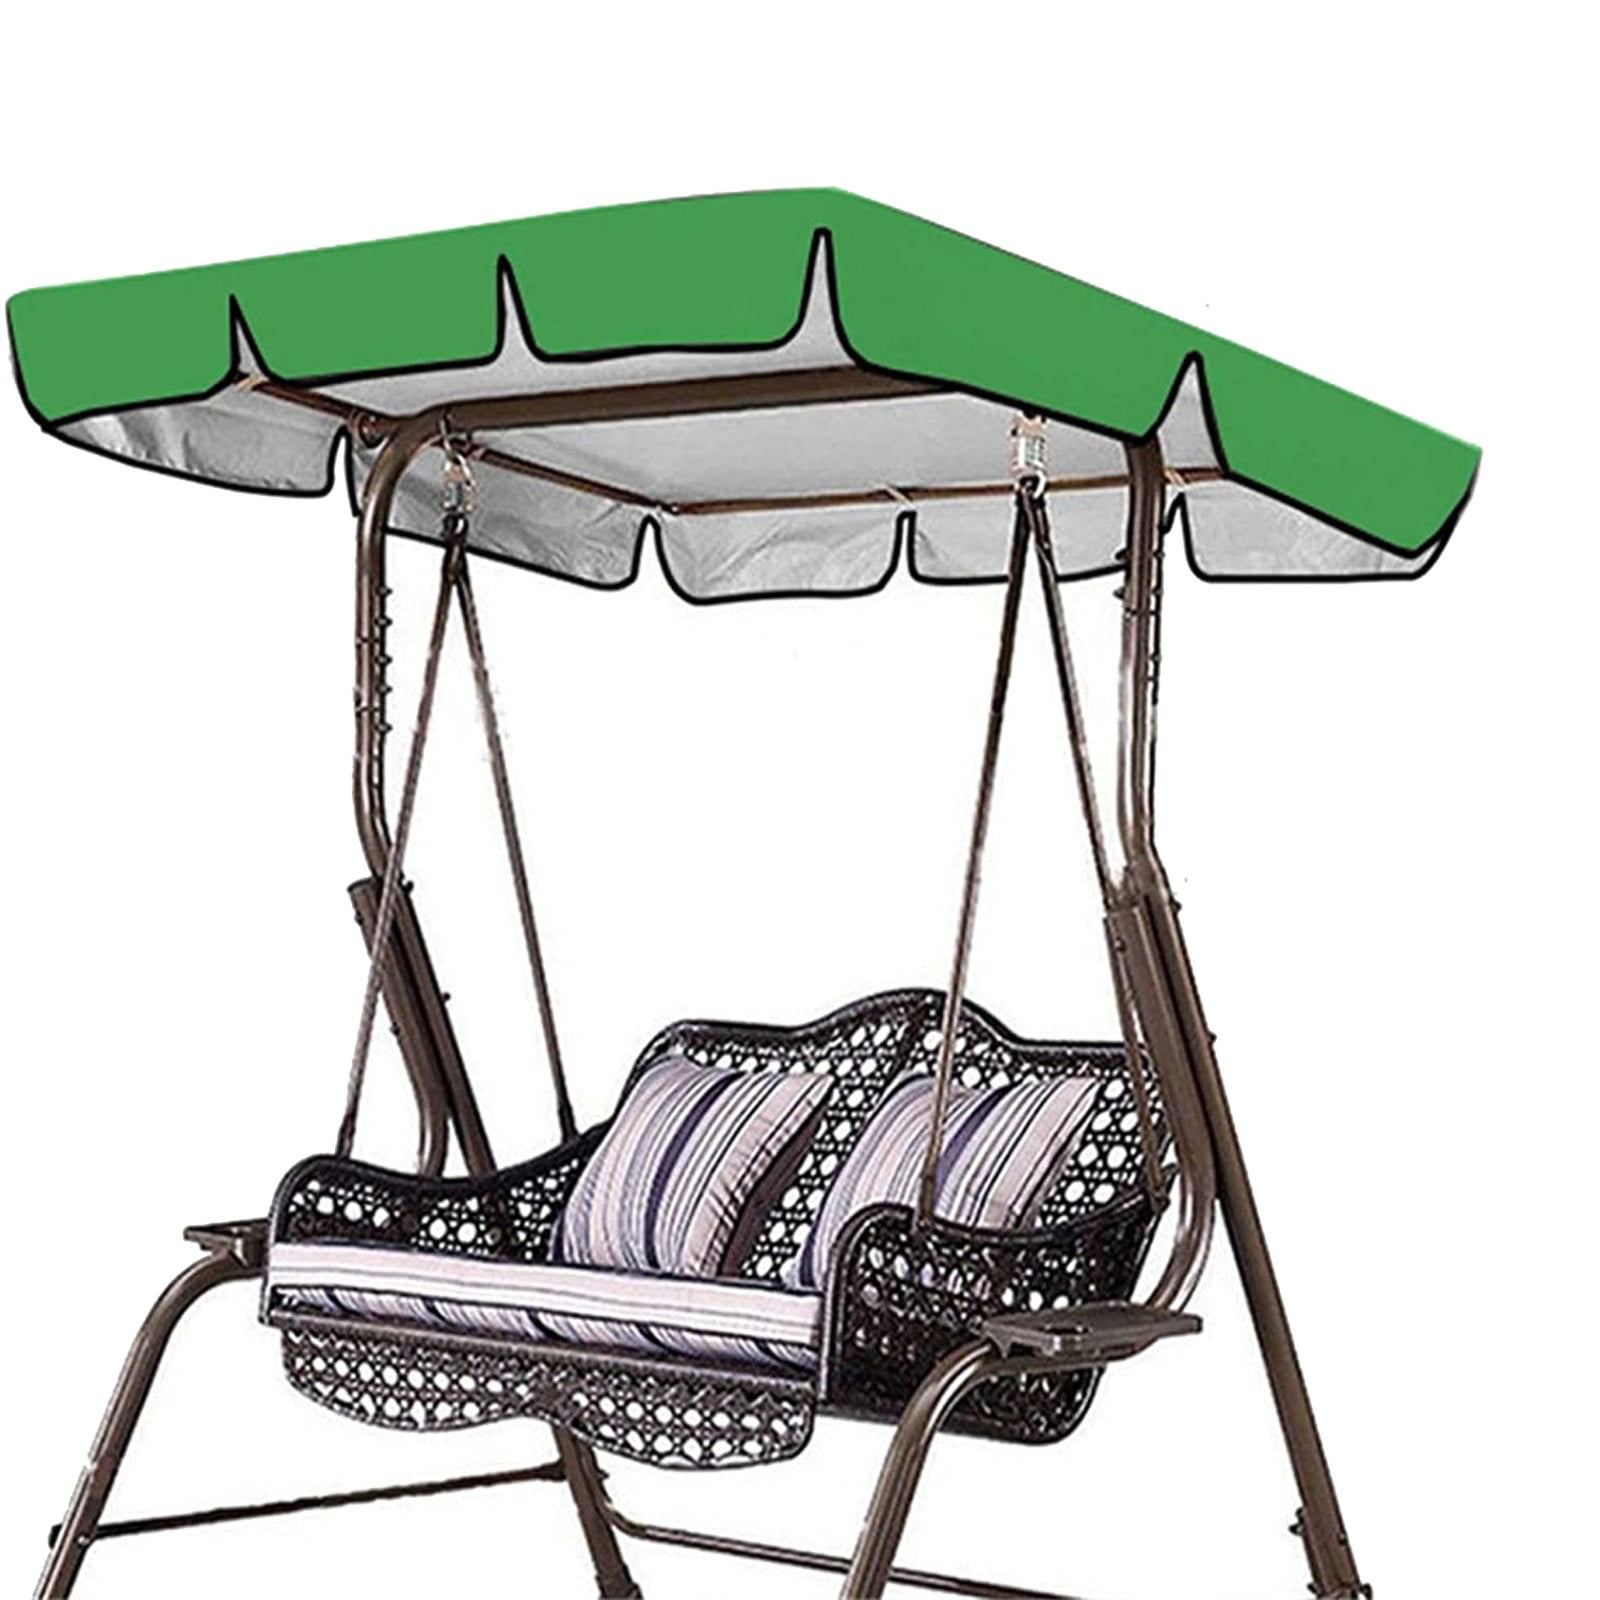 Case Grey for 3 Seater Swing Seat made of polyester 300D 